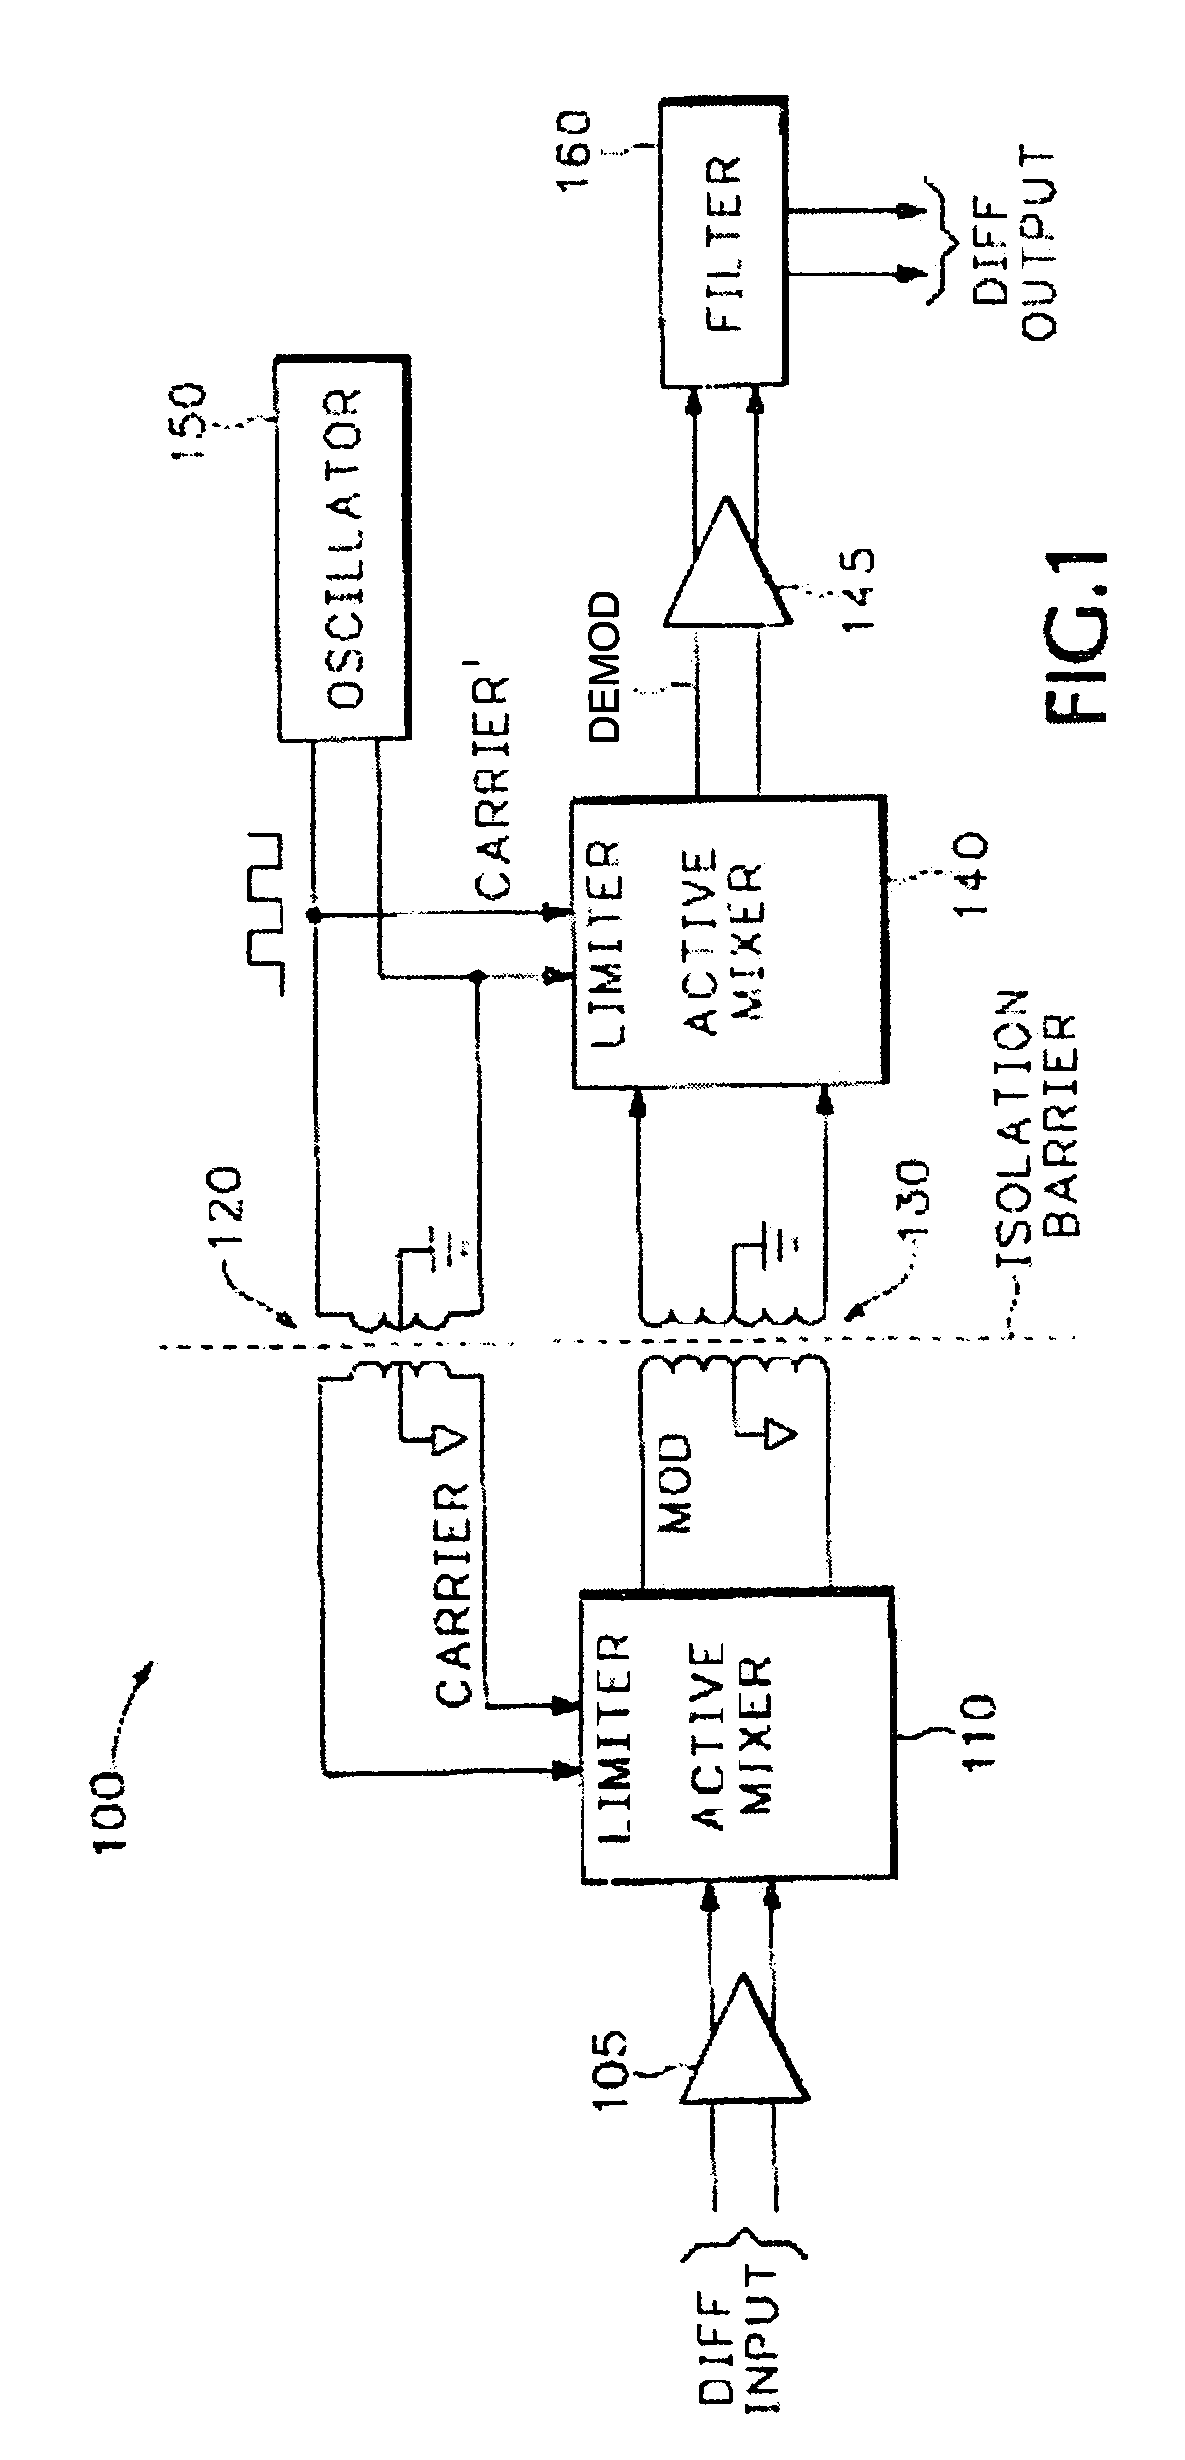 Apparatus and method for input channel isolation within an electronic test instrument